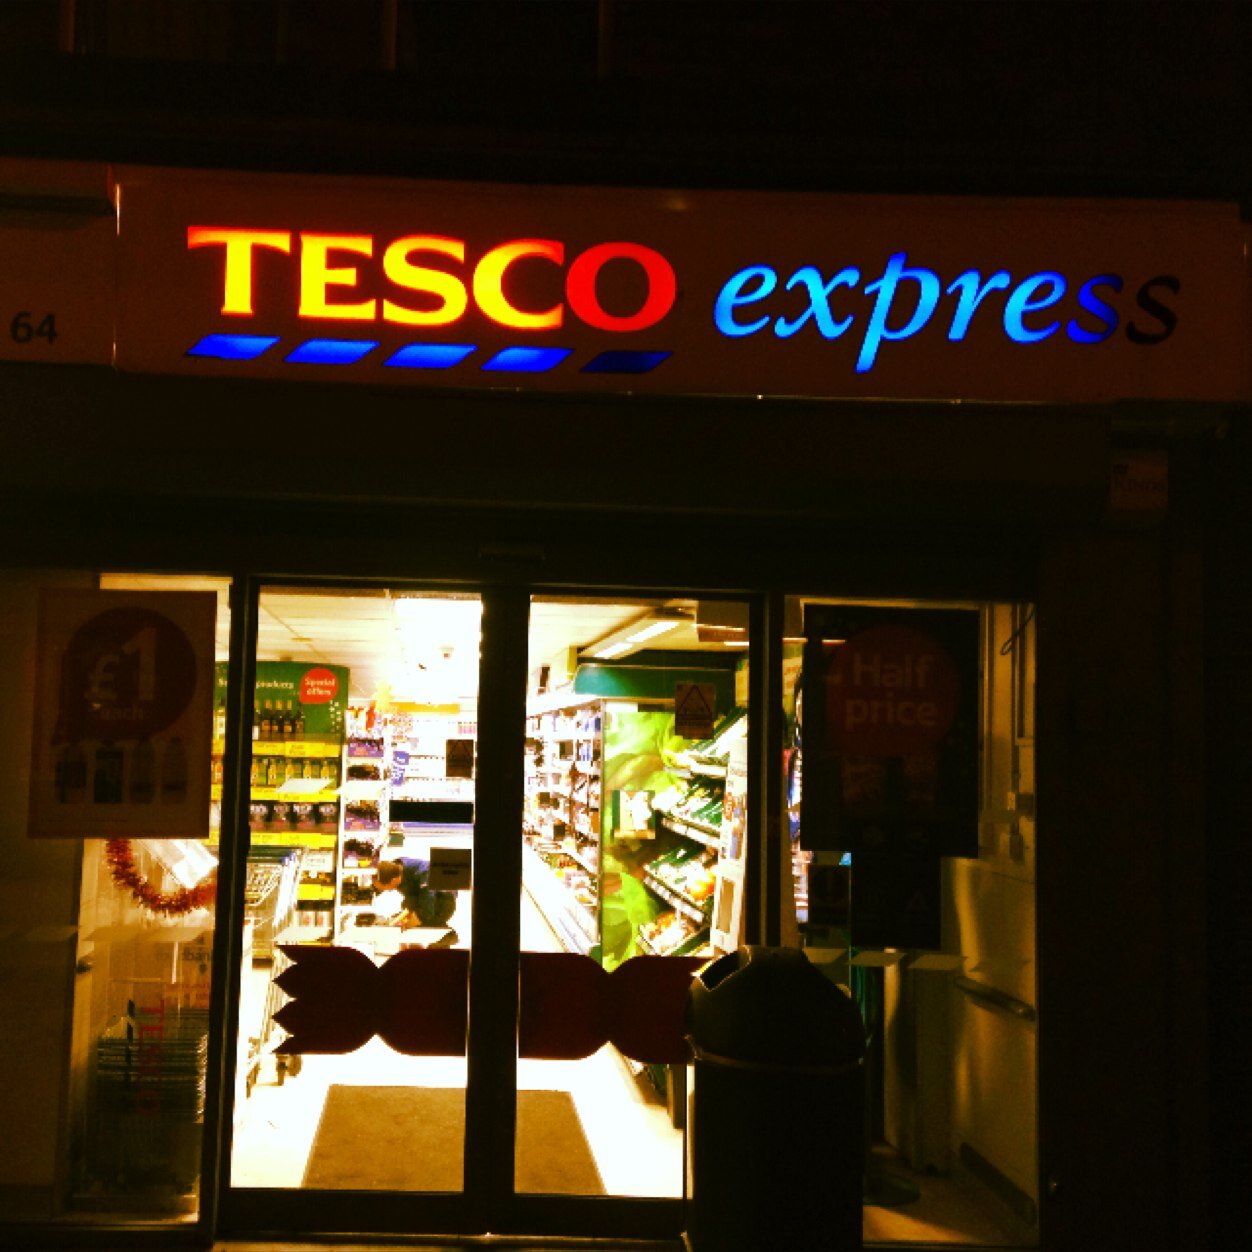 Latest offers, updates and news from the Tesco Express on Rose Lane. Suggestions and feedback welcome